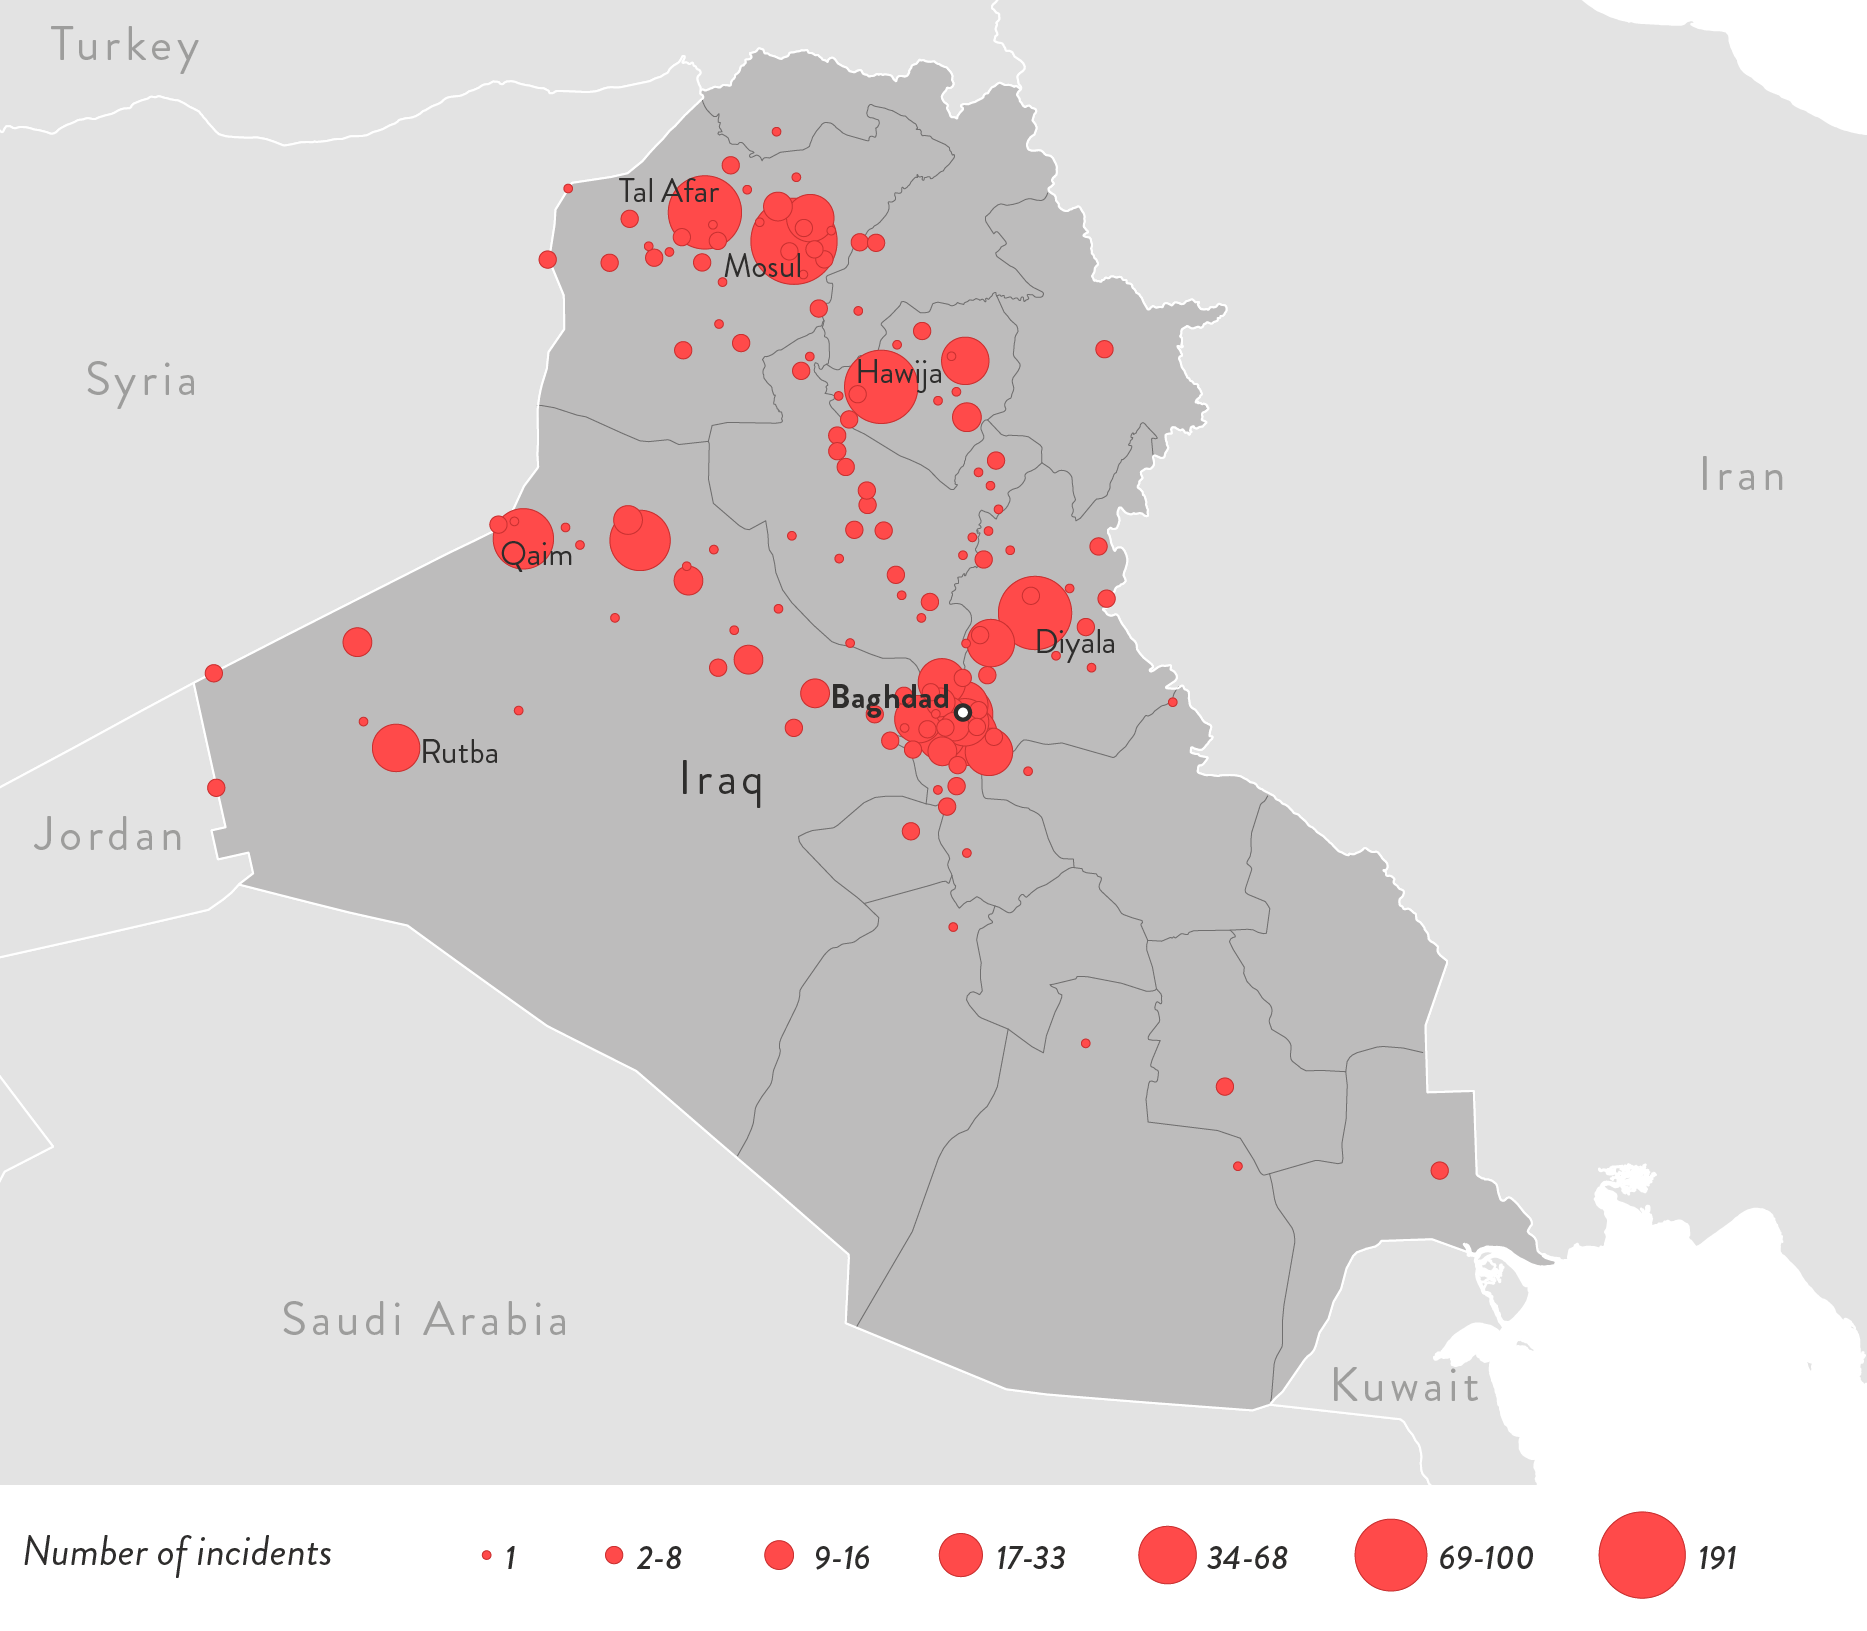 islamist-extremism-2017-ten-deadliest-countries - Figure 2.4: Map of Violent Islamist Incidents and Counter-Measures in Iraq, 2017